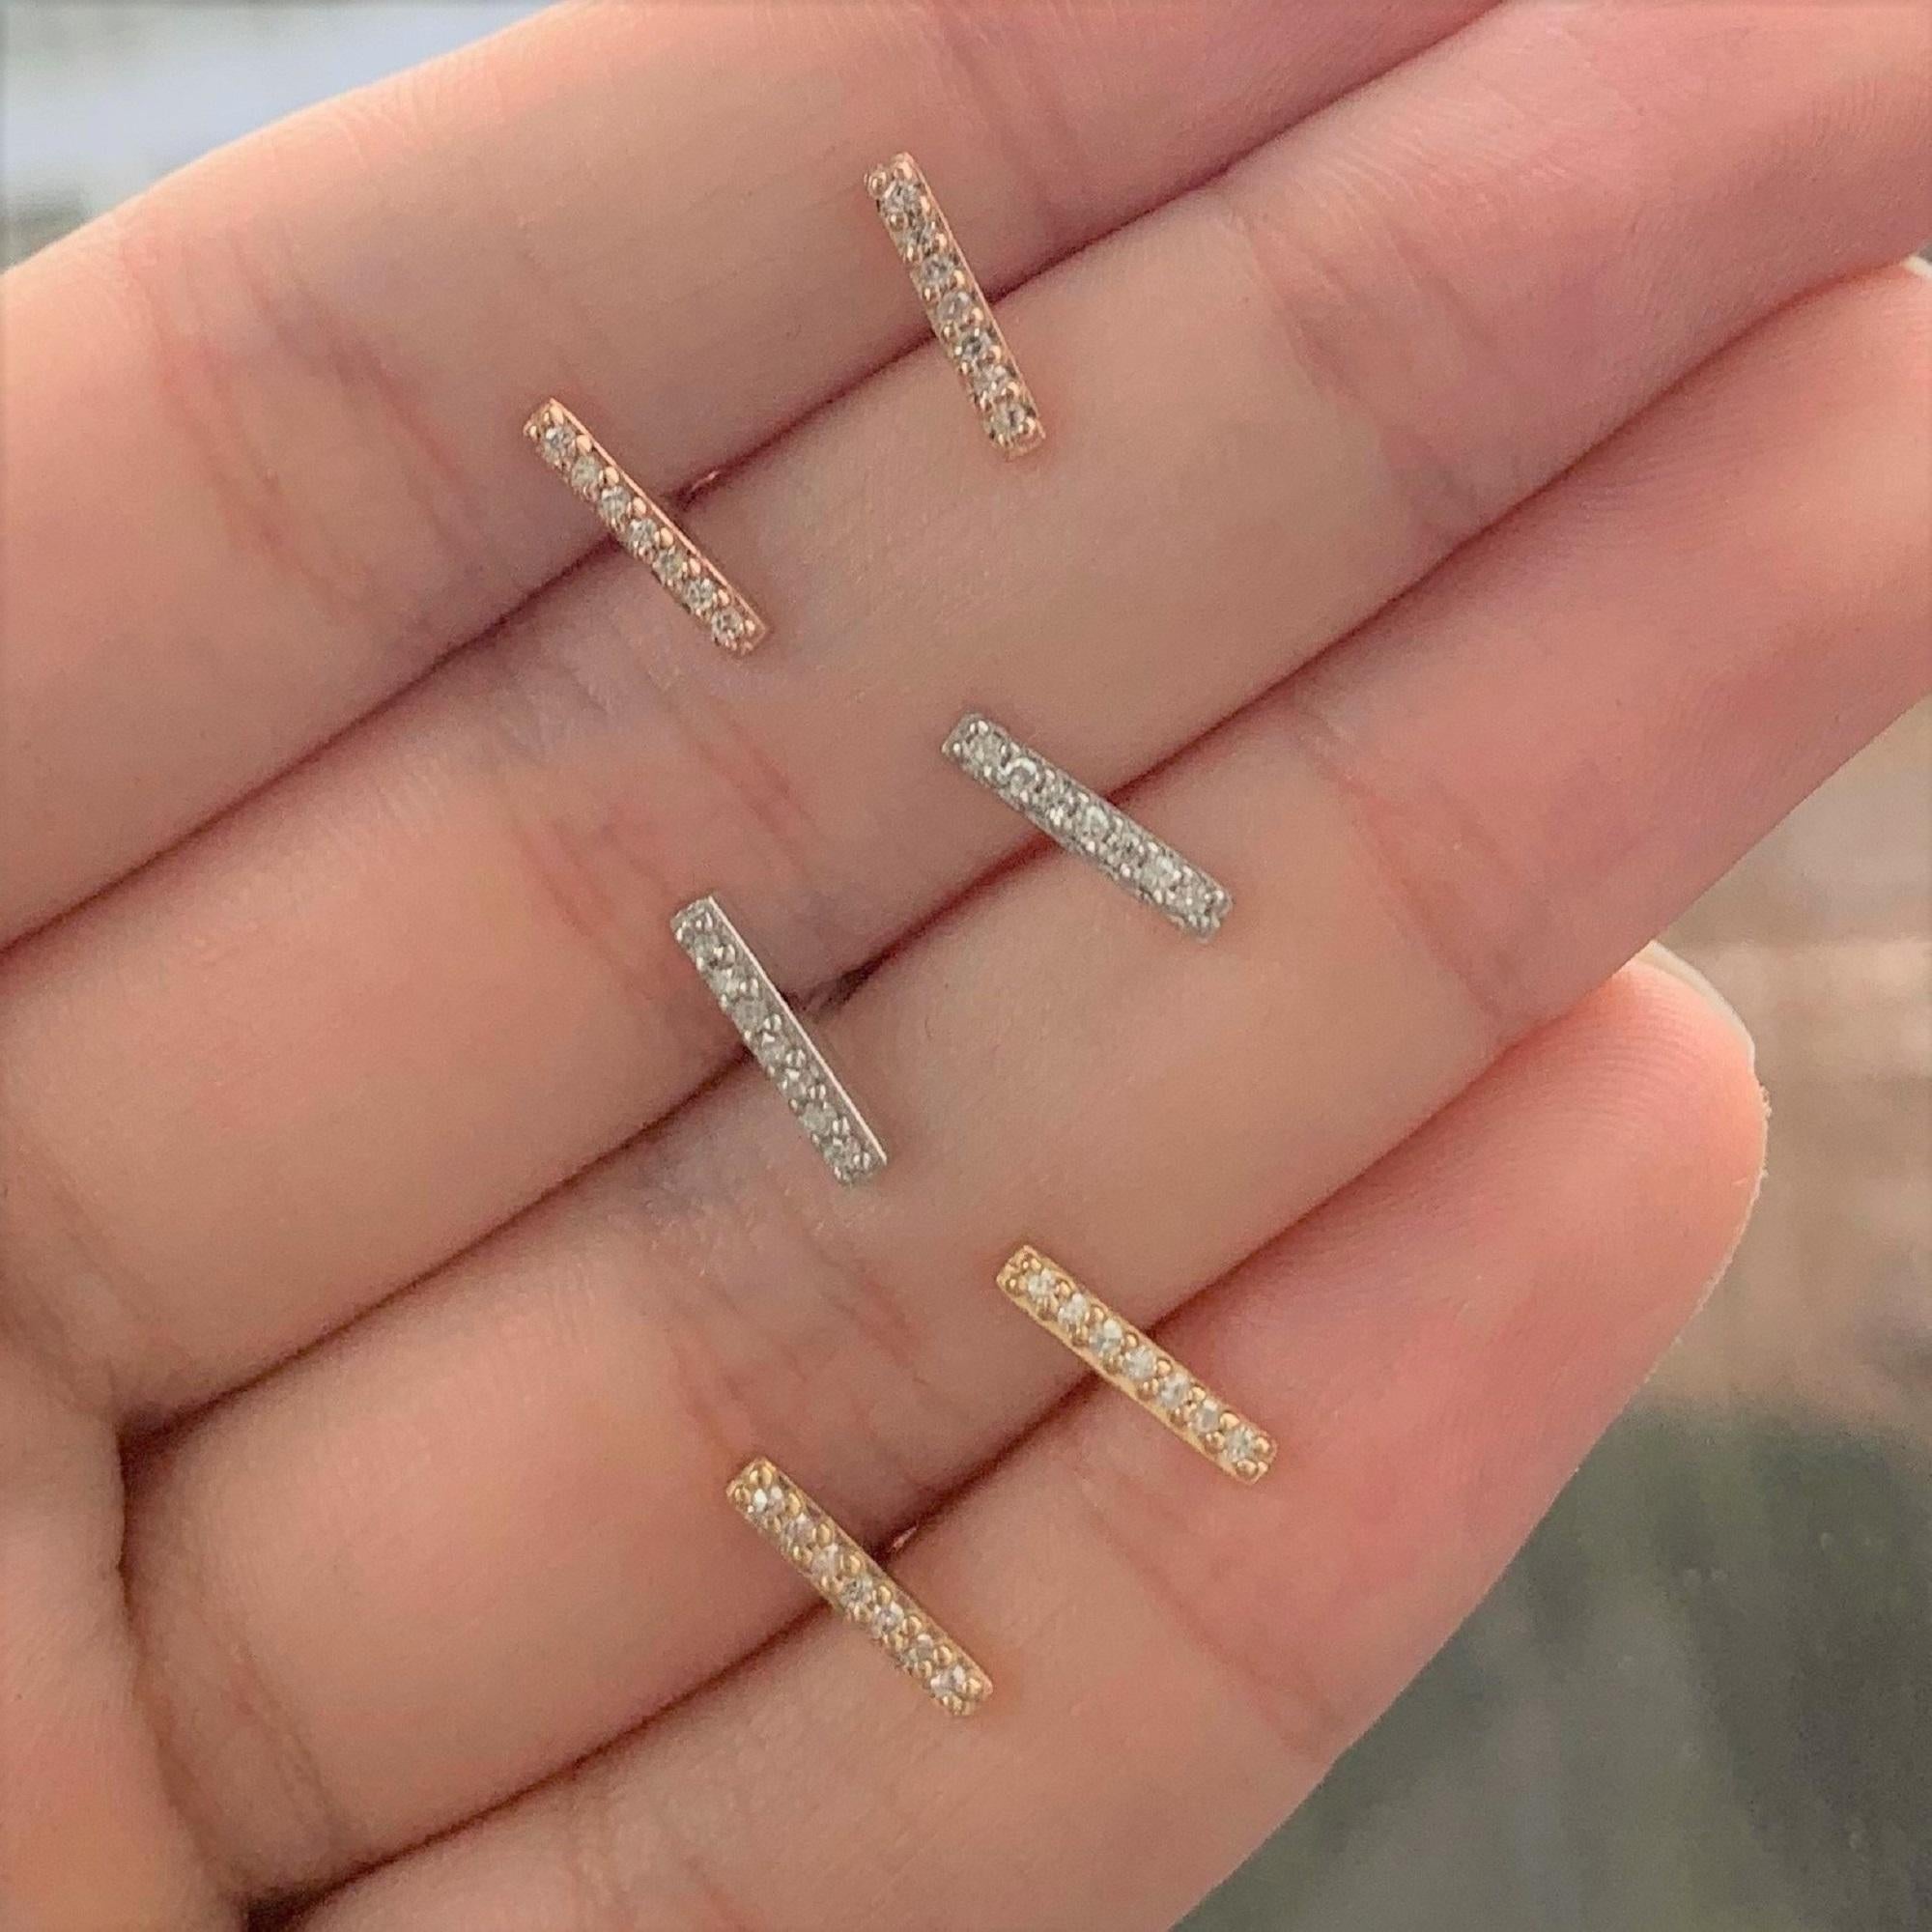 Classic, Gorgeous and Comfortable every day wear Diamond Bar Studs Earrings! Makes the perfect addition to your jewelry collection or a gift to someone dear for the holidays! Crafted of 14k gold featuring 14 round sparkling natural diamonds